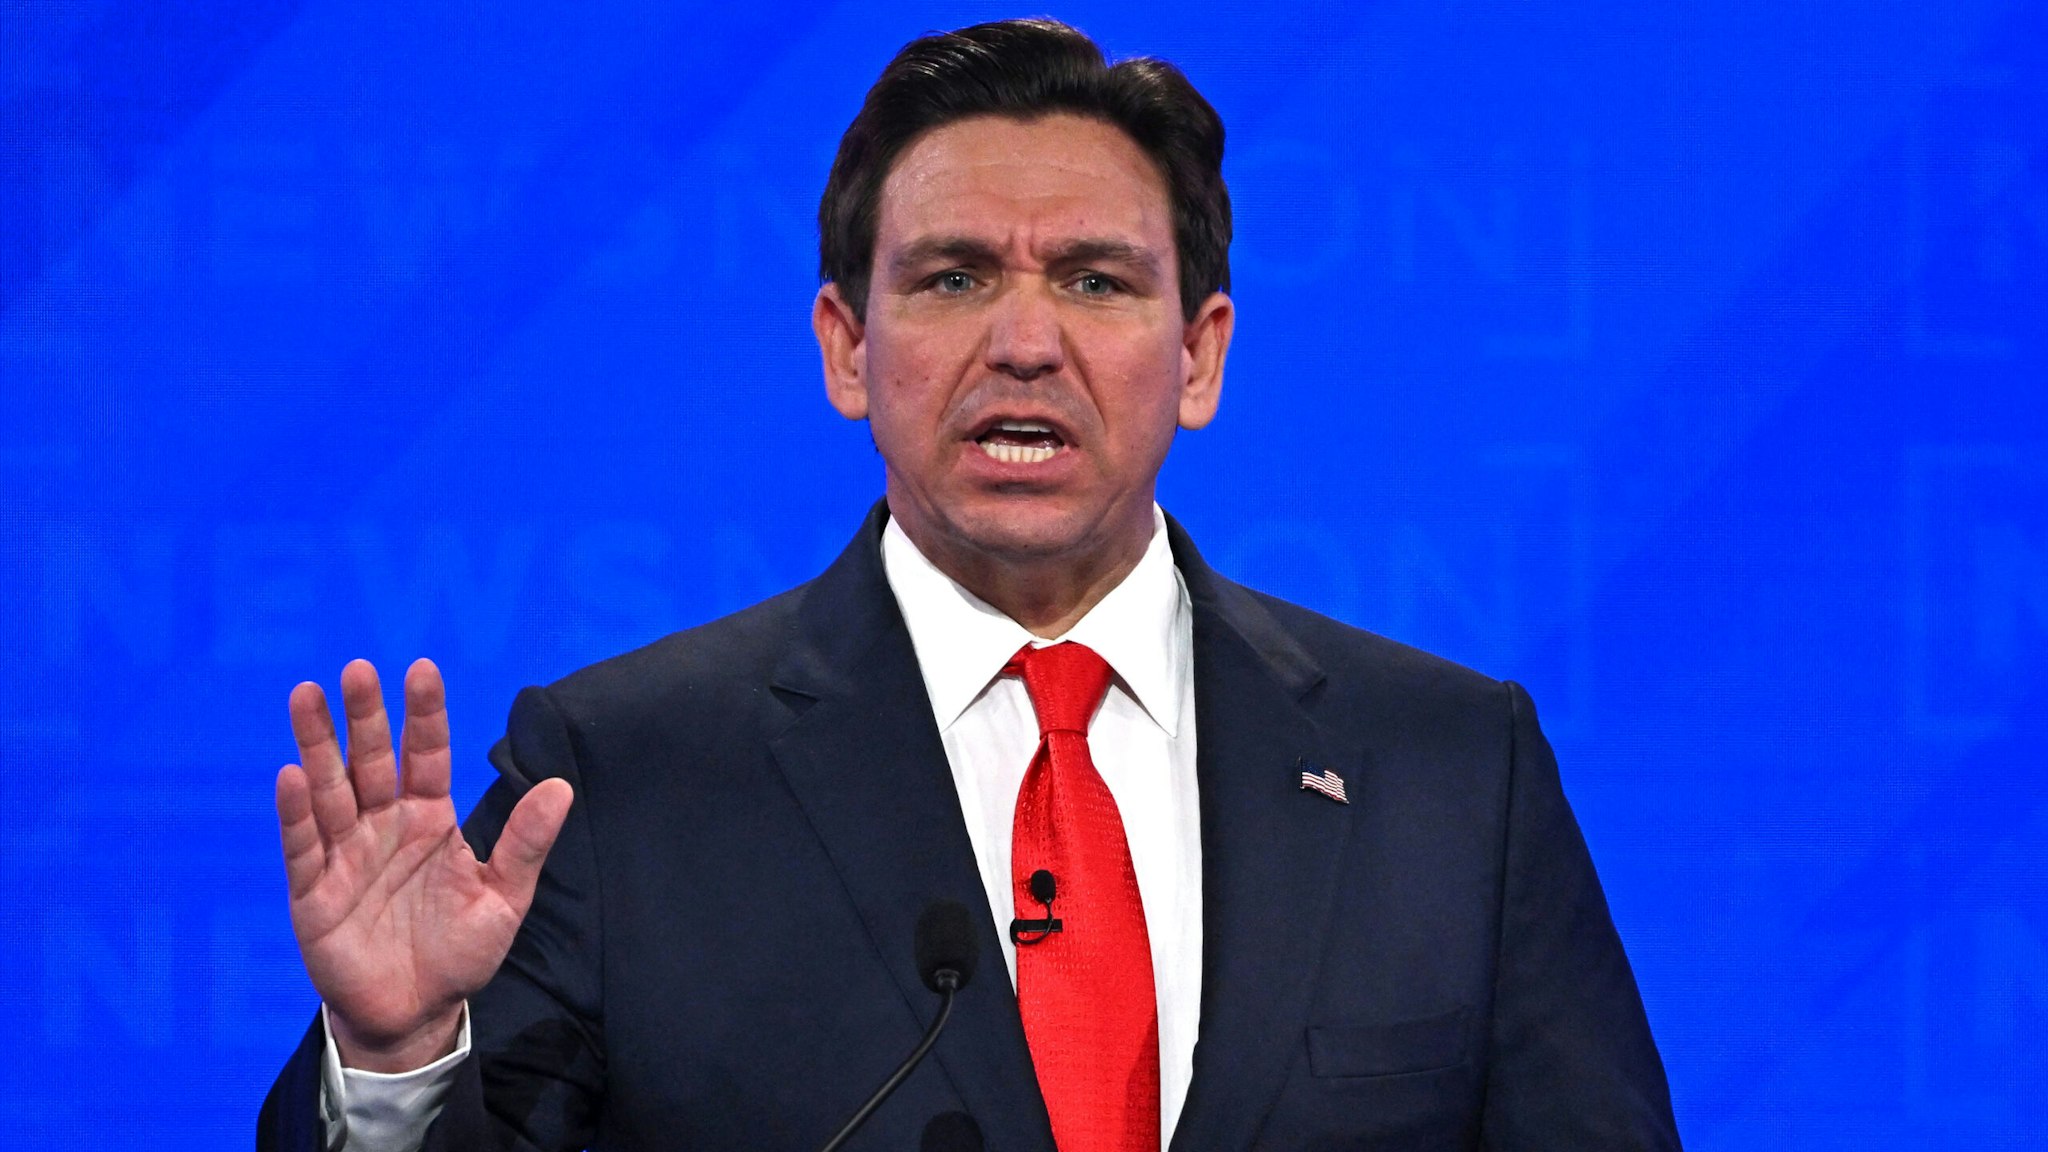 Florida Governor Ron DeSantis gestures as he speaks during the fourth Republican presidential primary debate at the University of Alabama in Tuscaloosa, Alabama, on December 6, 2023.